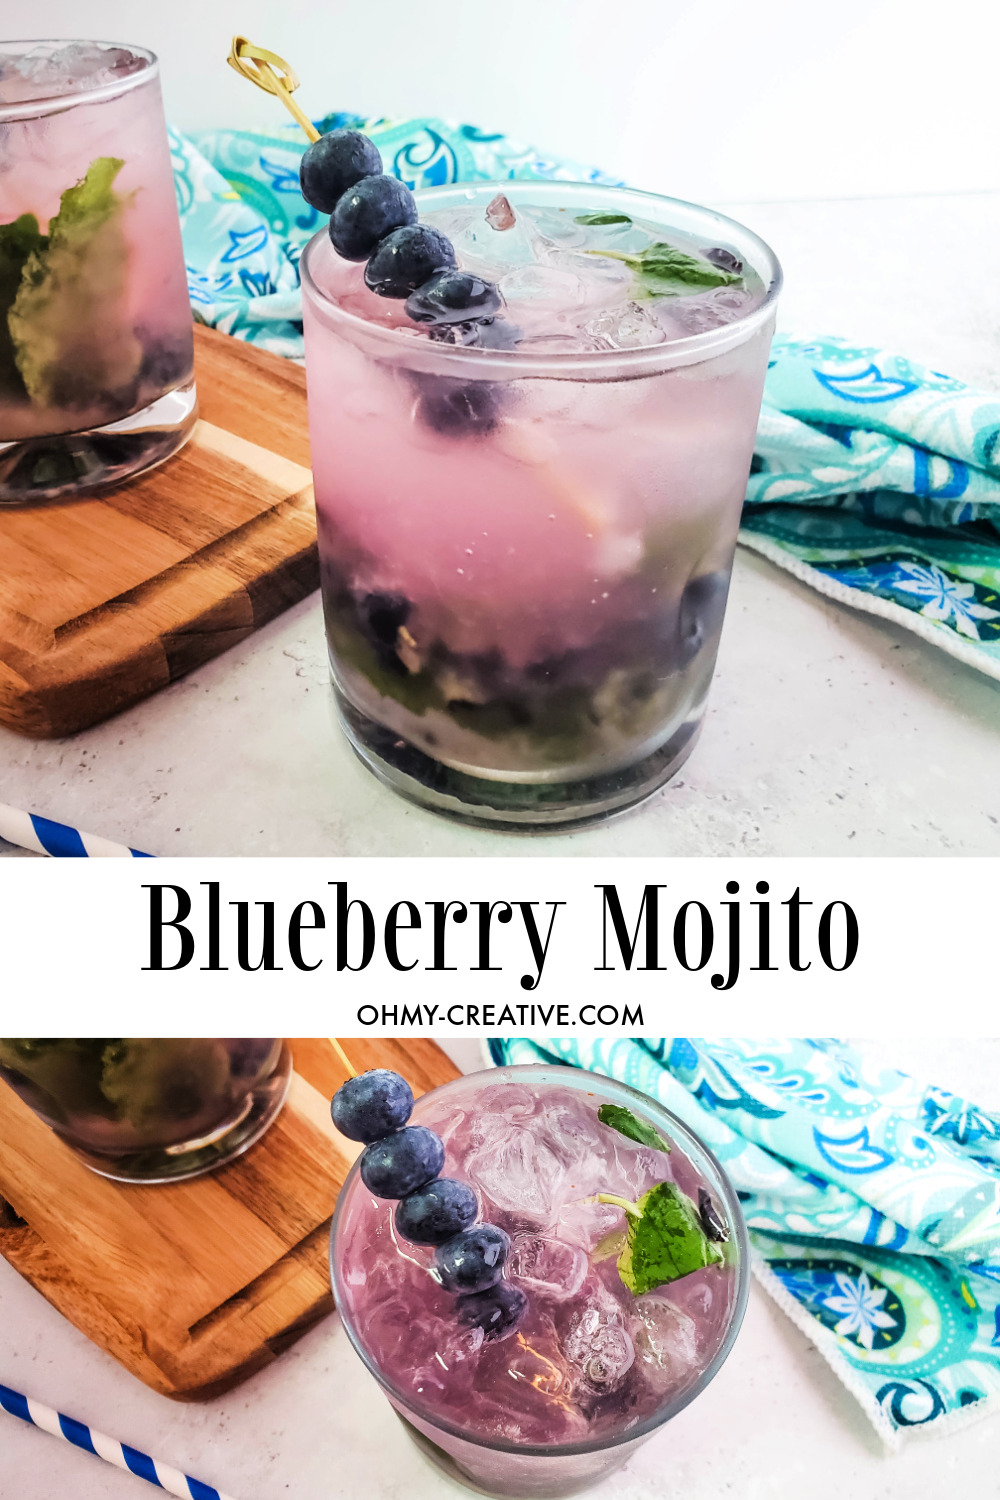 A blueberry mojito cocktail garnished with a skewer of blueberries and surrounded by a aqua hand towel and blue striped straw